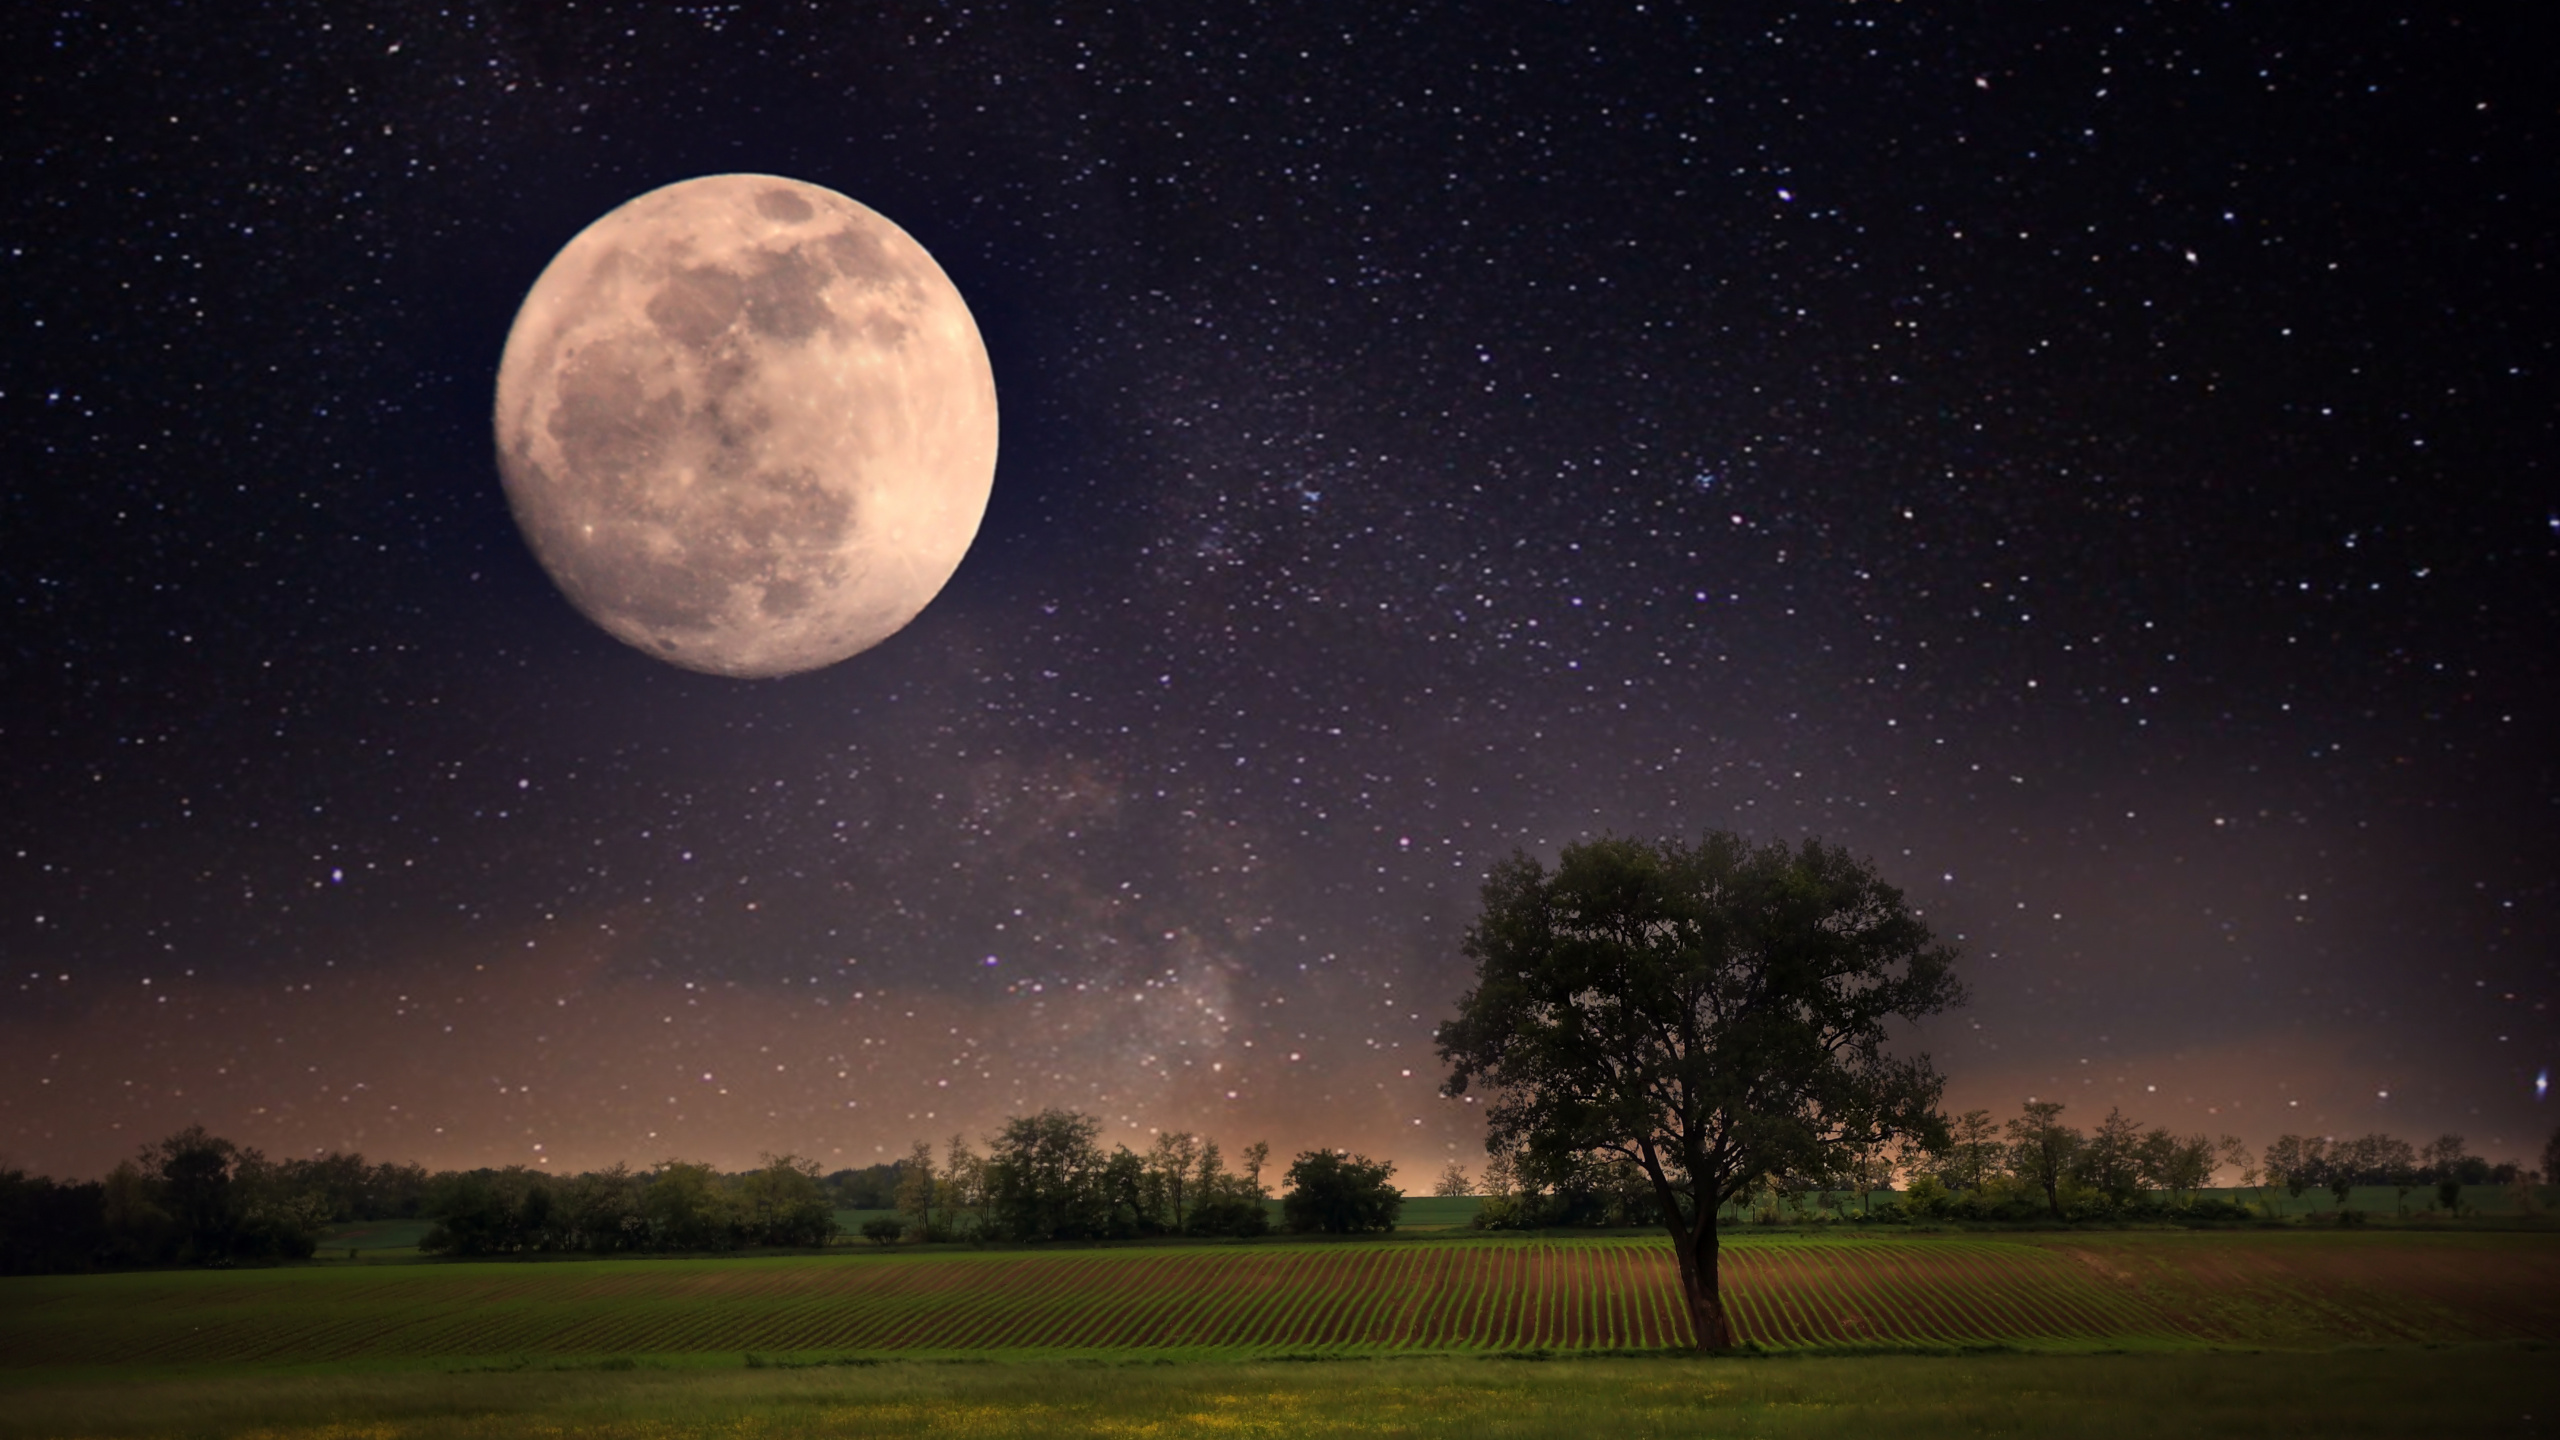 Green Grass Field With Trees Under Moon. Wallpaper in 2560x1440 Resolution